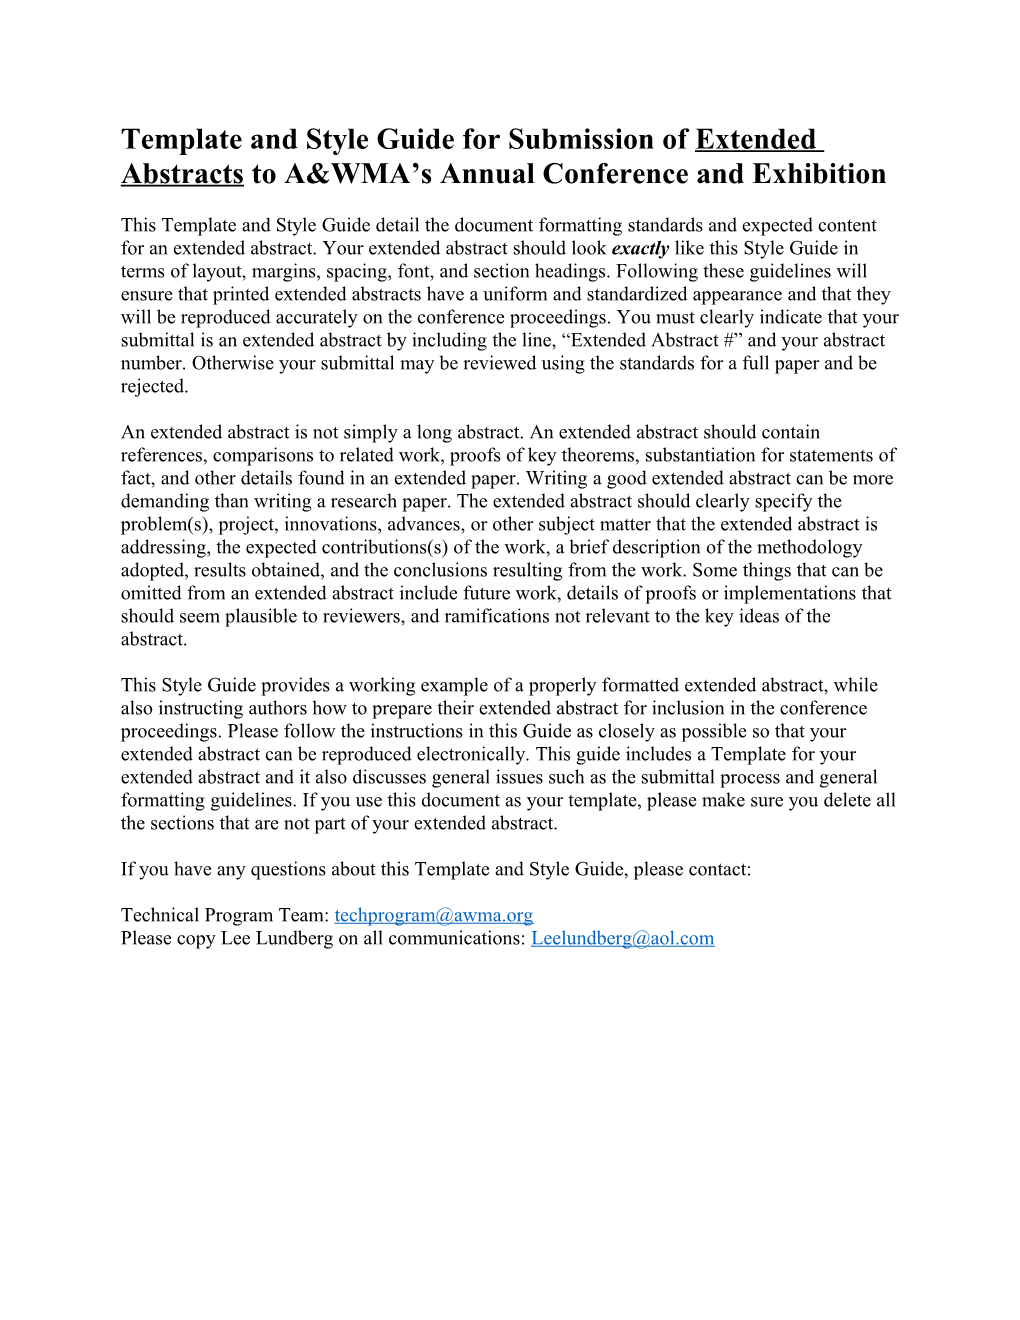 Template and Style Guide for Submission of Extended Abstracts to A&WMA S Annual Conference